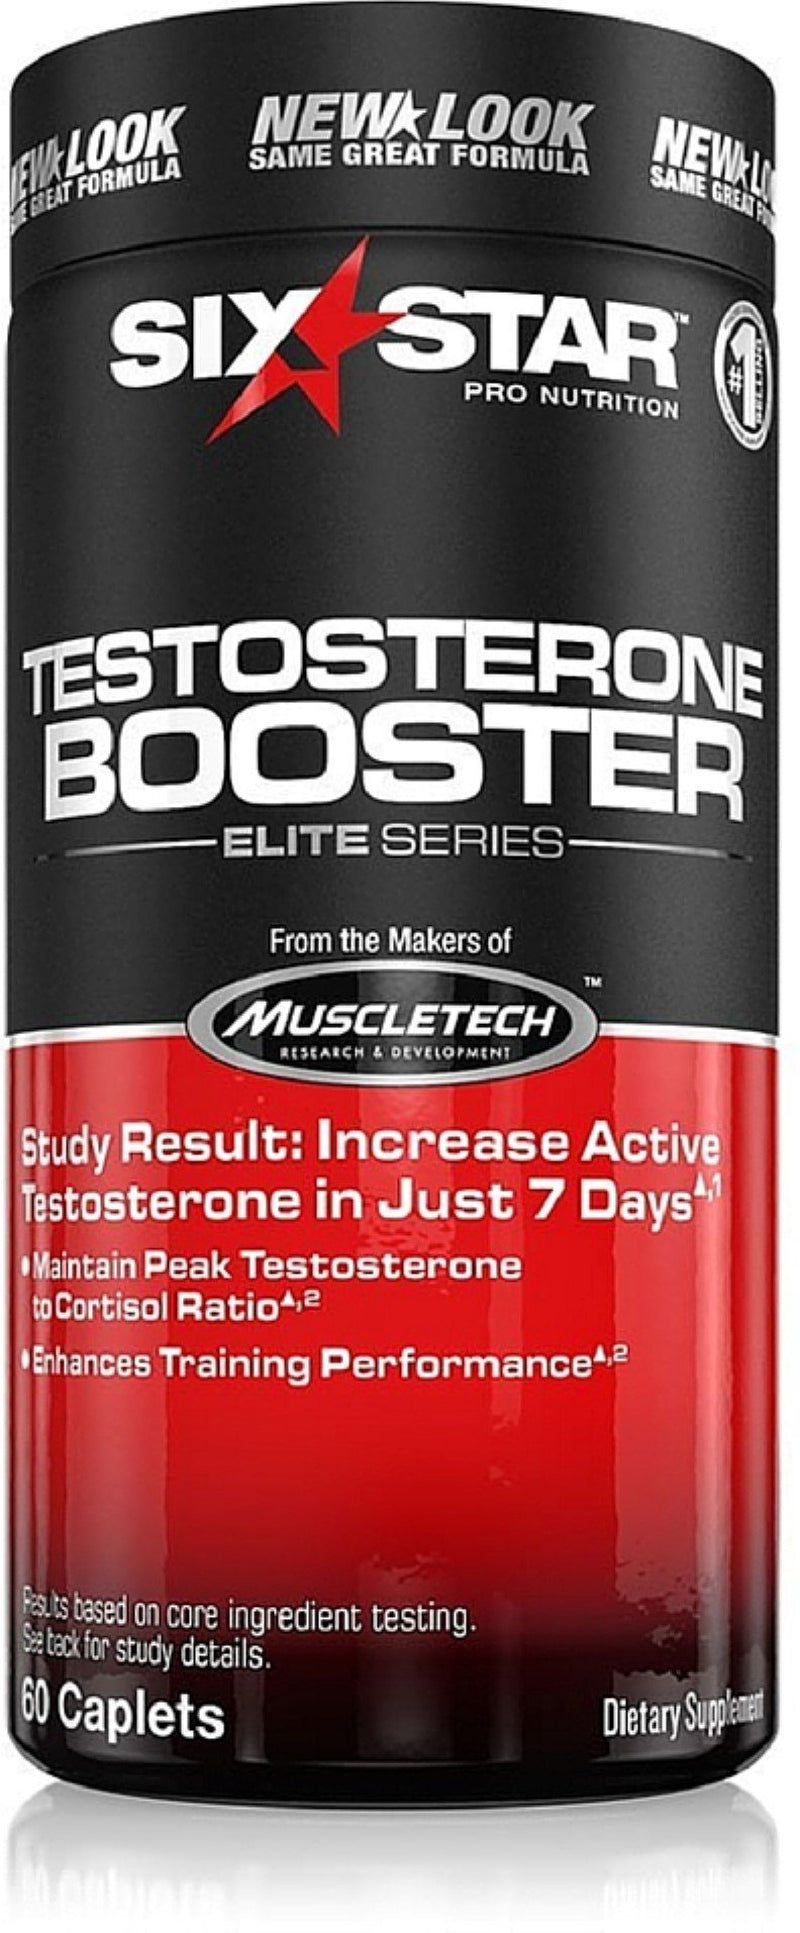 Six Star Testosterone Booster Enhances Training Performance, 60Ct, 4 Pack